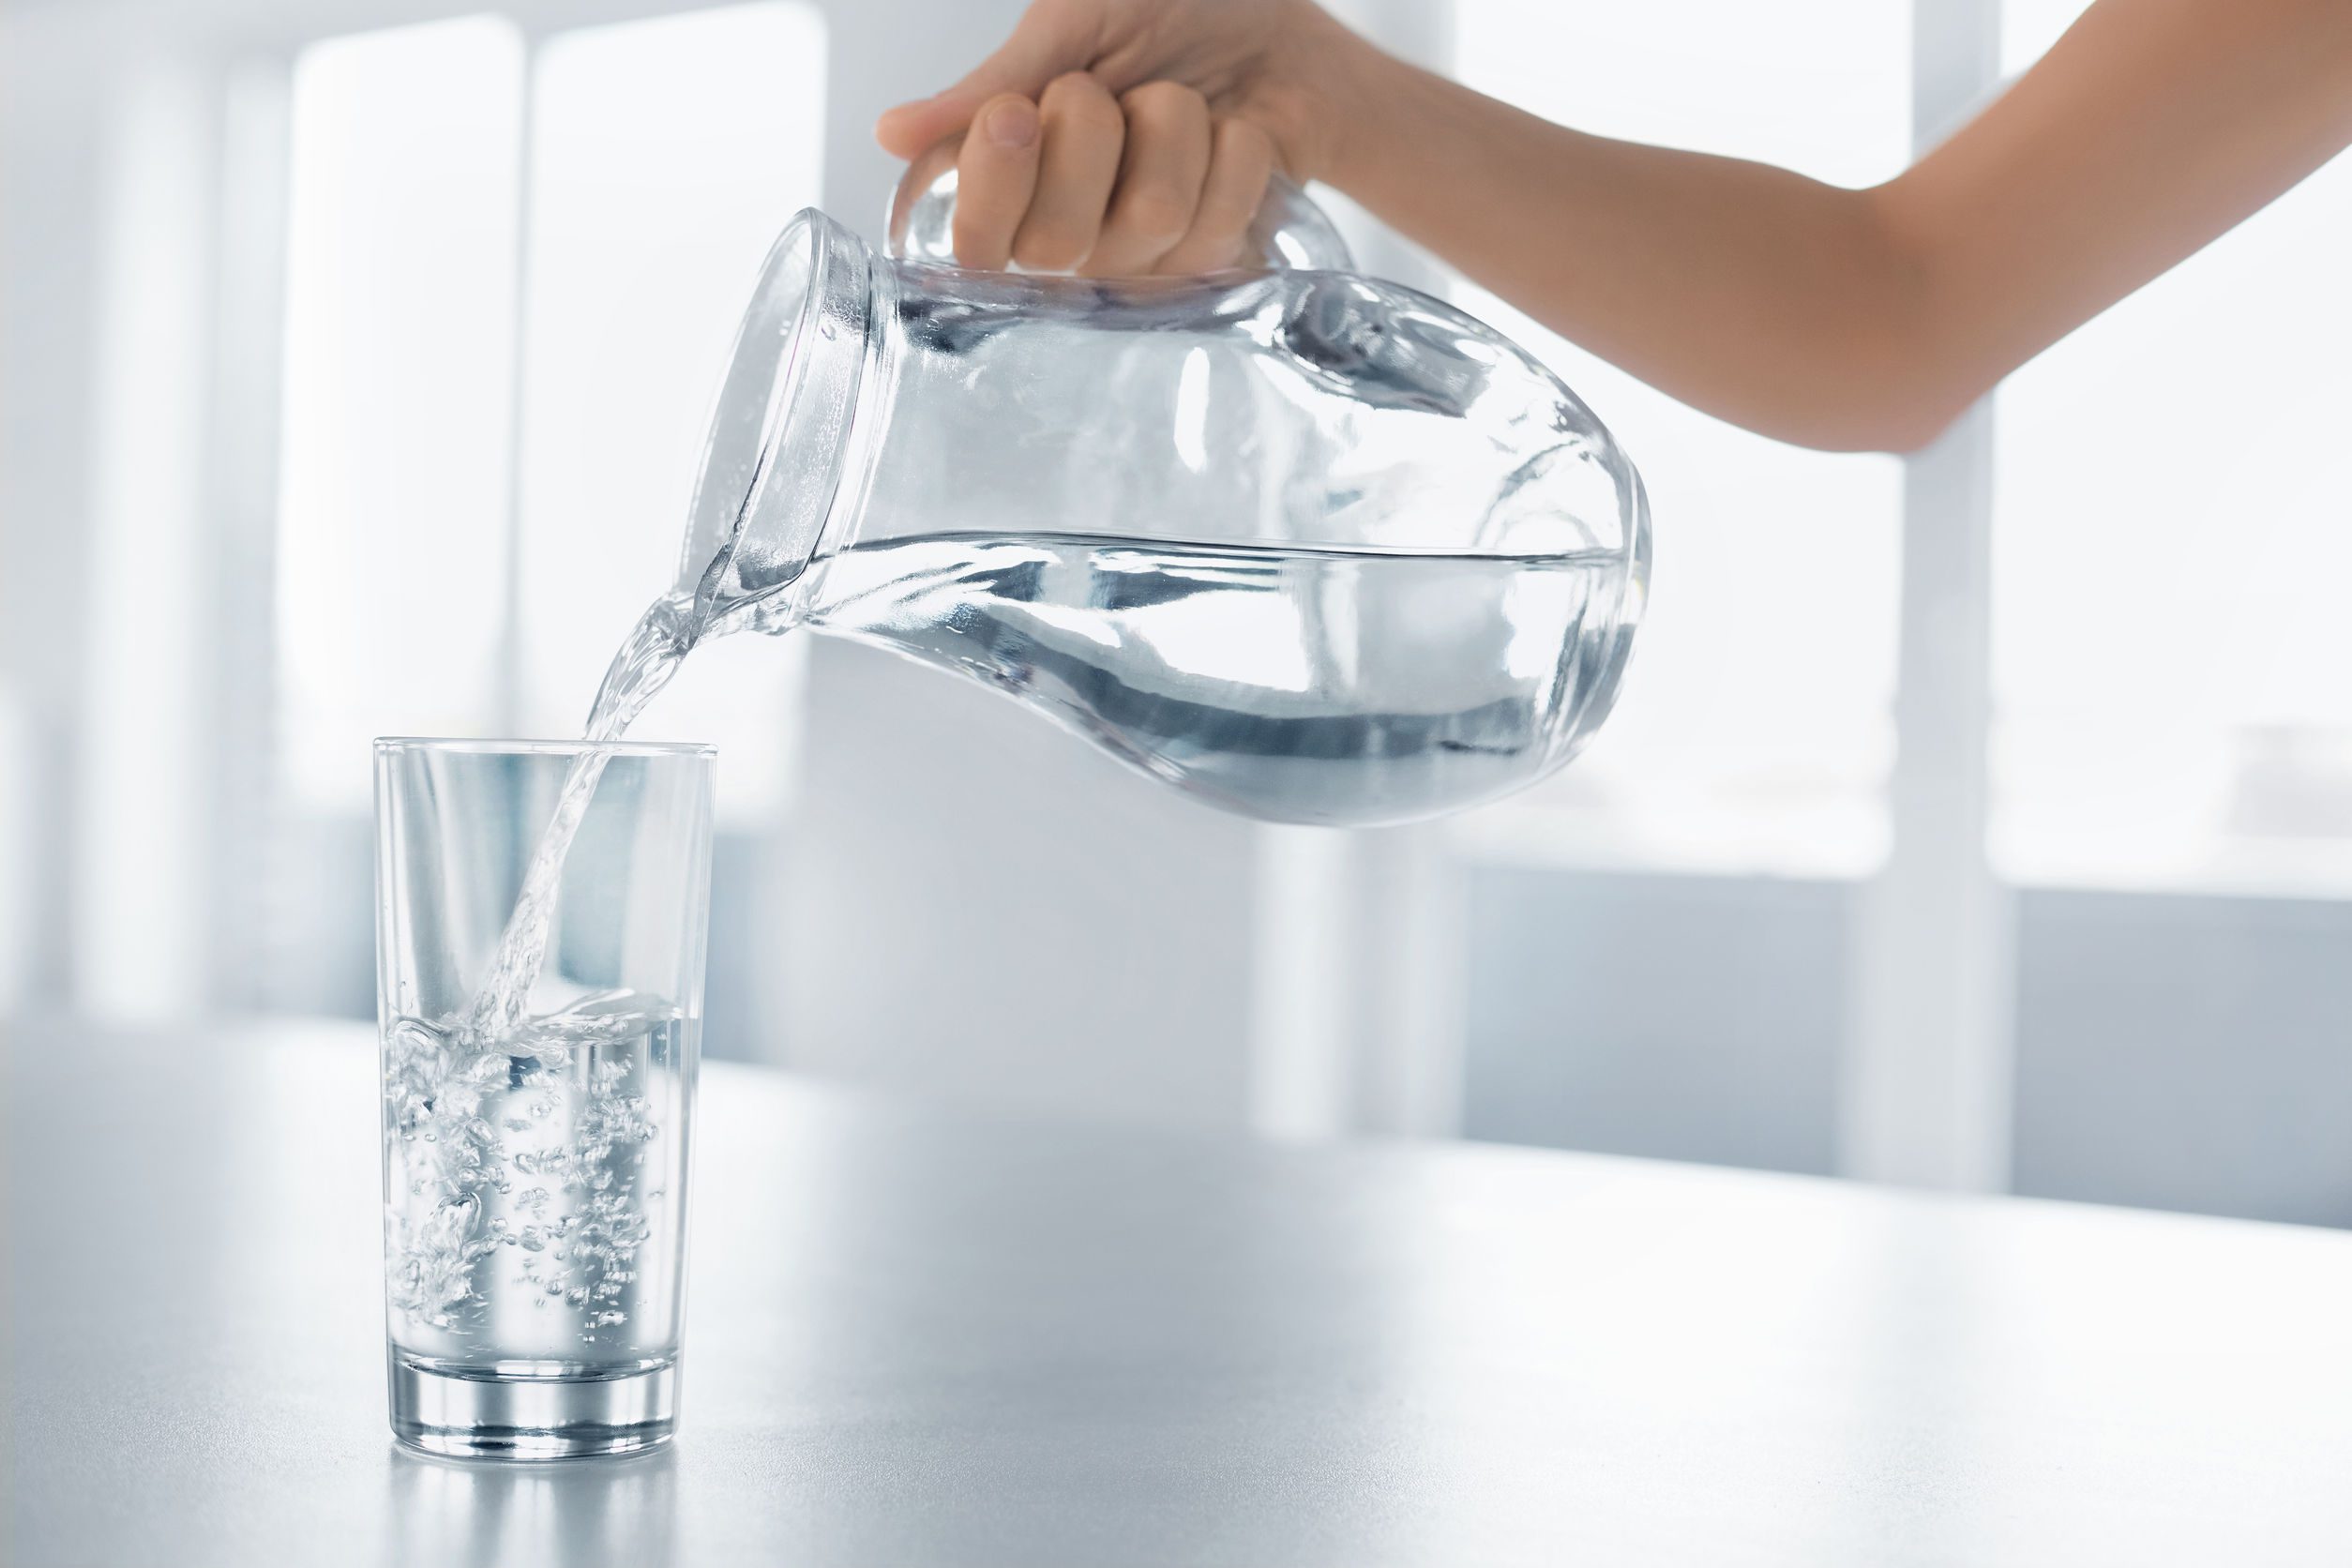 47894681 - drink water. woman's hand pouring fresh pure water from pitcher into a glass. health and diet concept. healthy lifestyle. healthcare and beauty. hydratation.